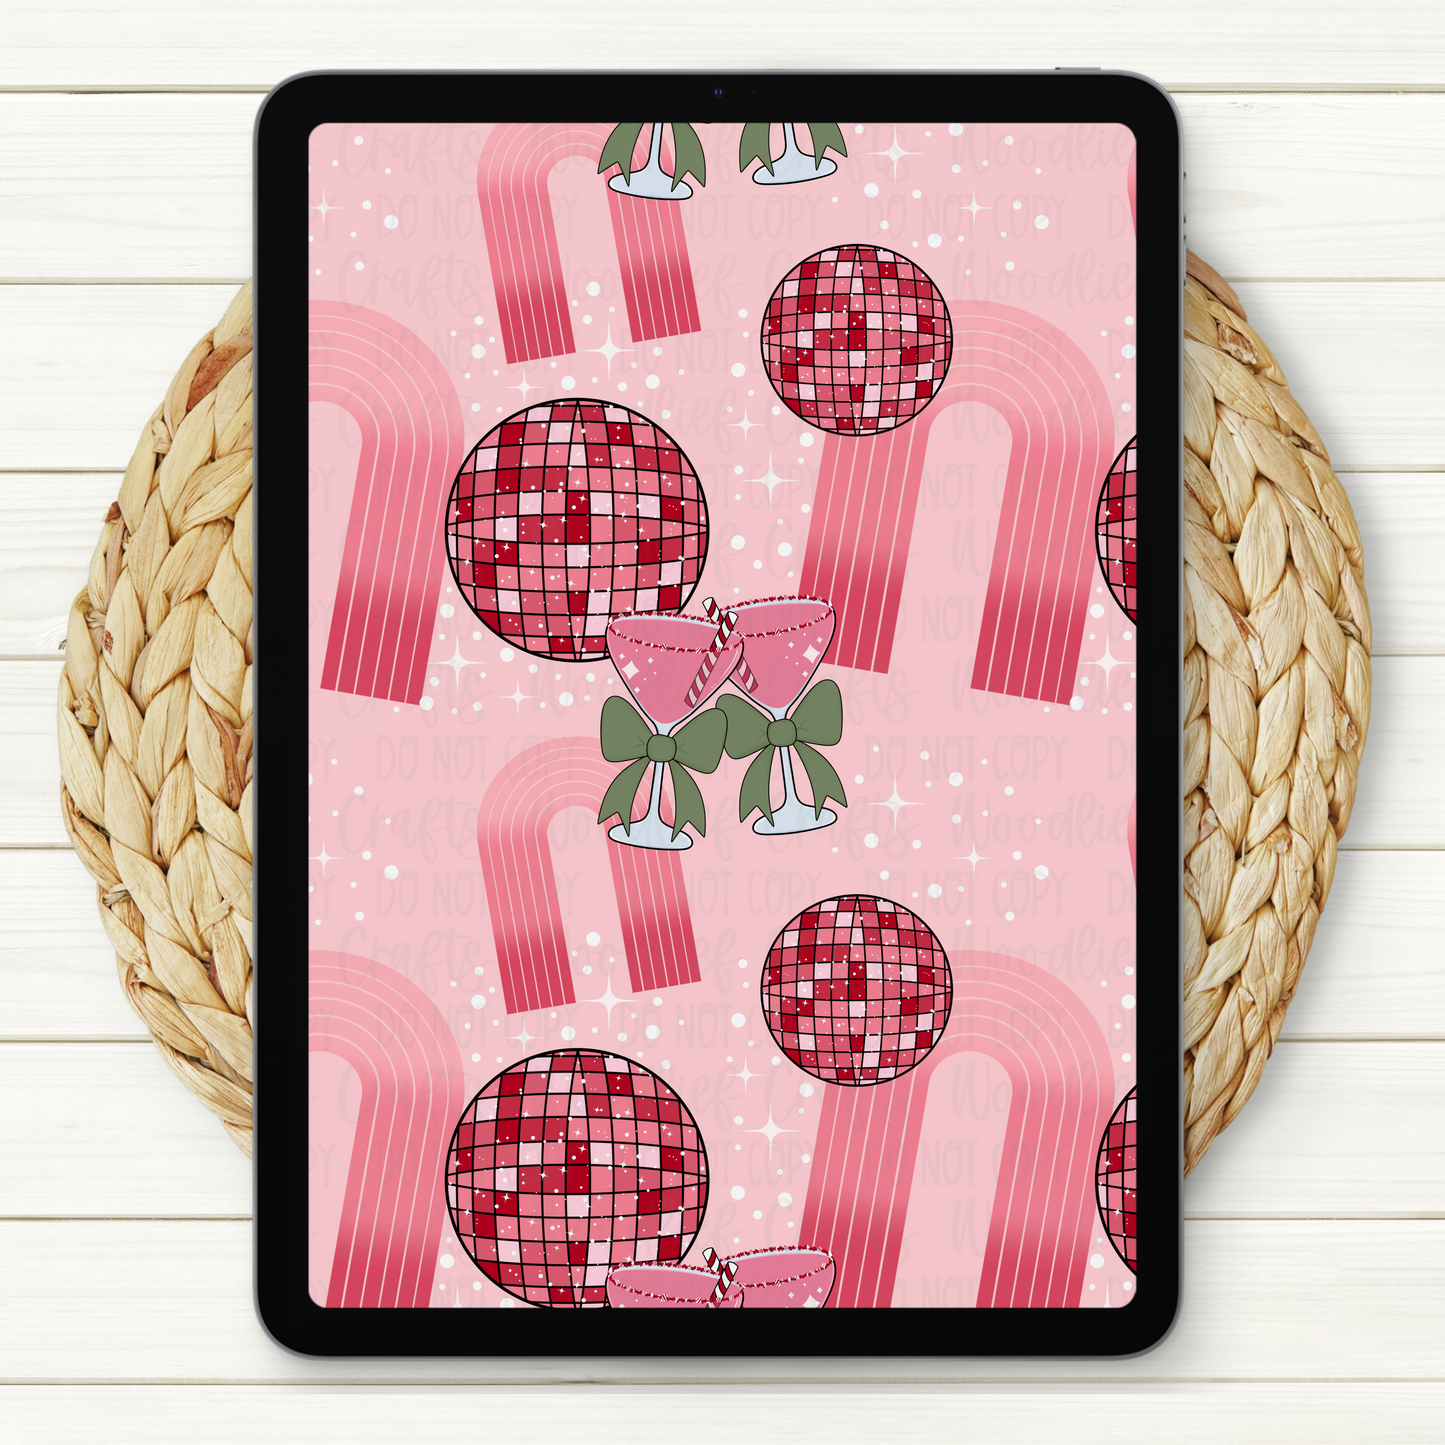 Tis The Season To Be Jolly Seamless Digital Paper | Two Scales Included